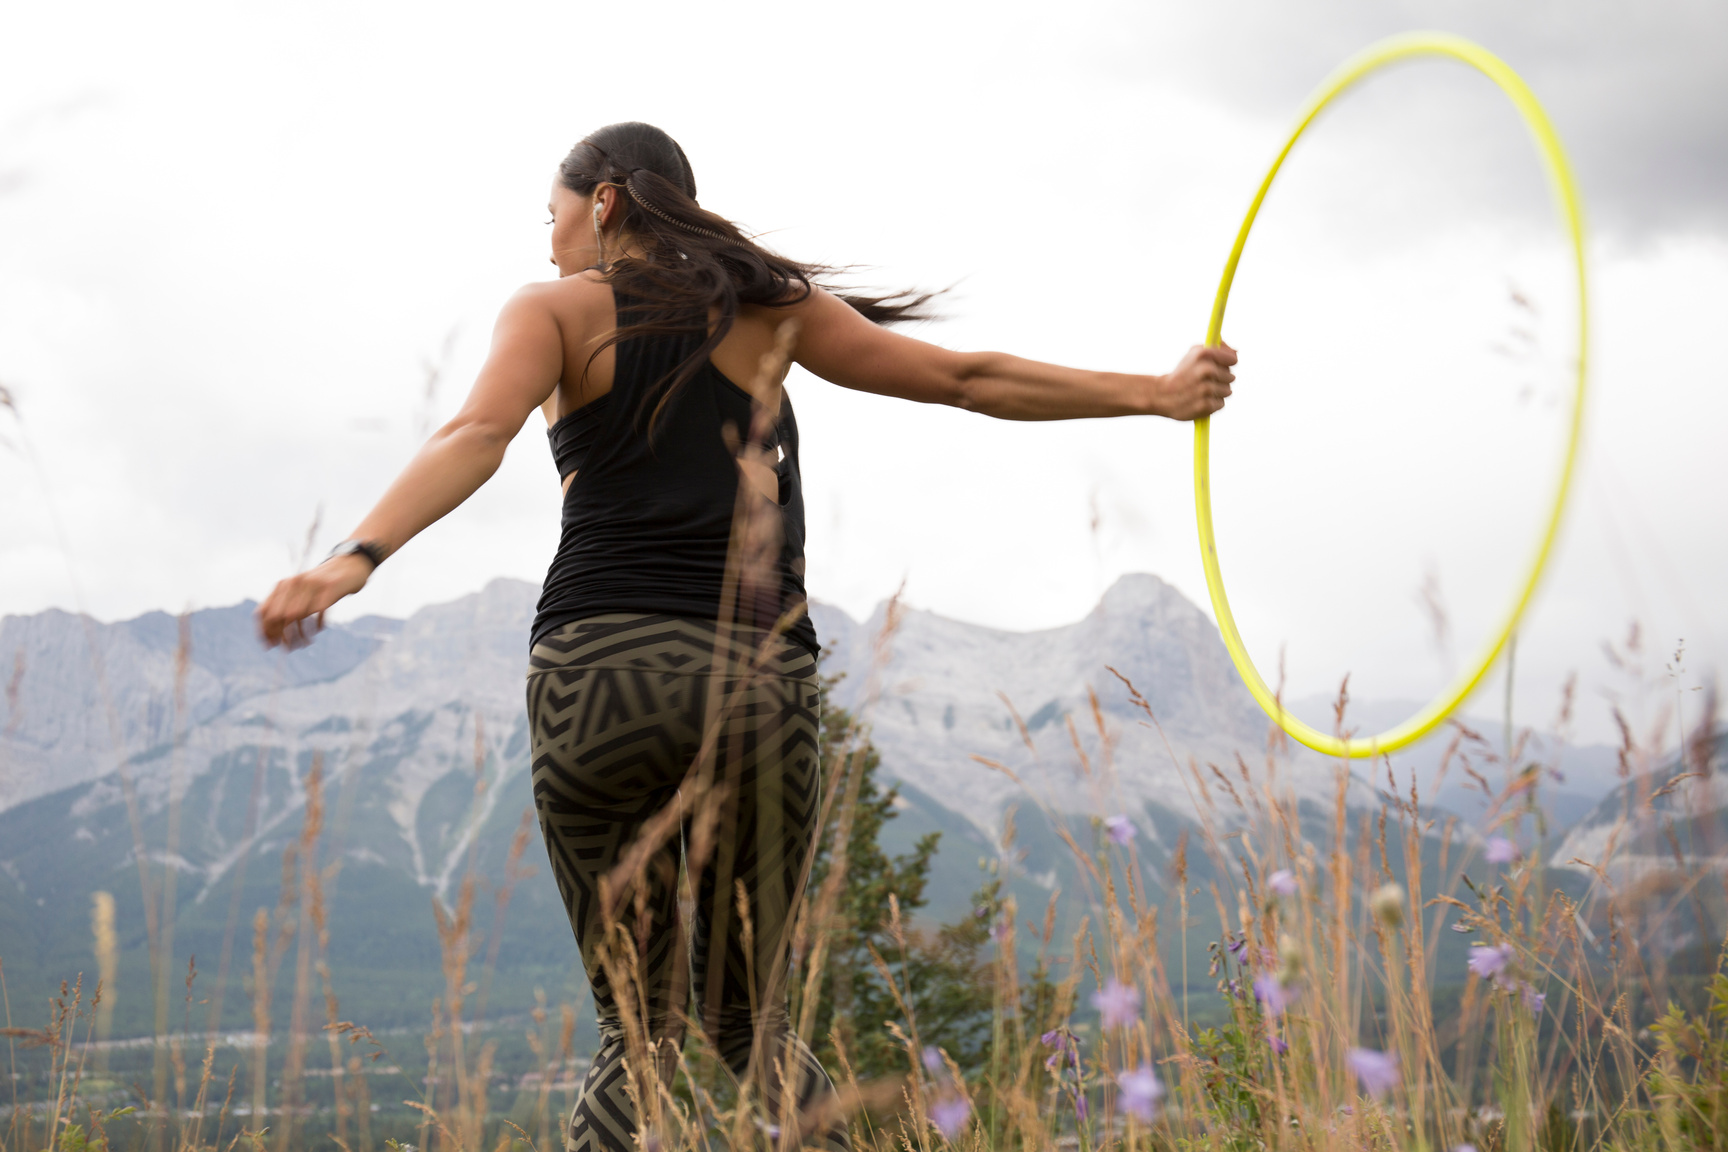 Native American woman dances with hoops, in mountains